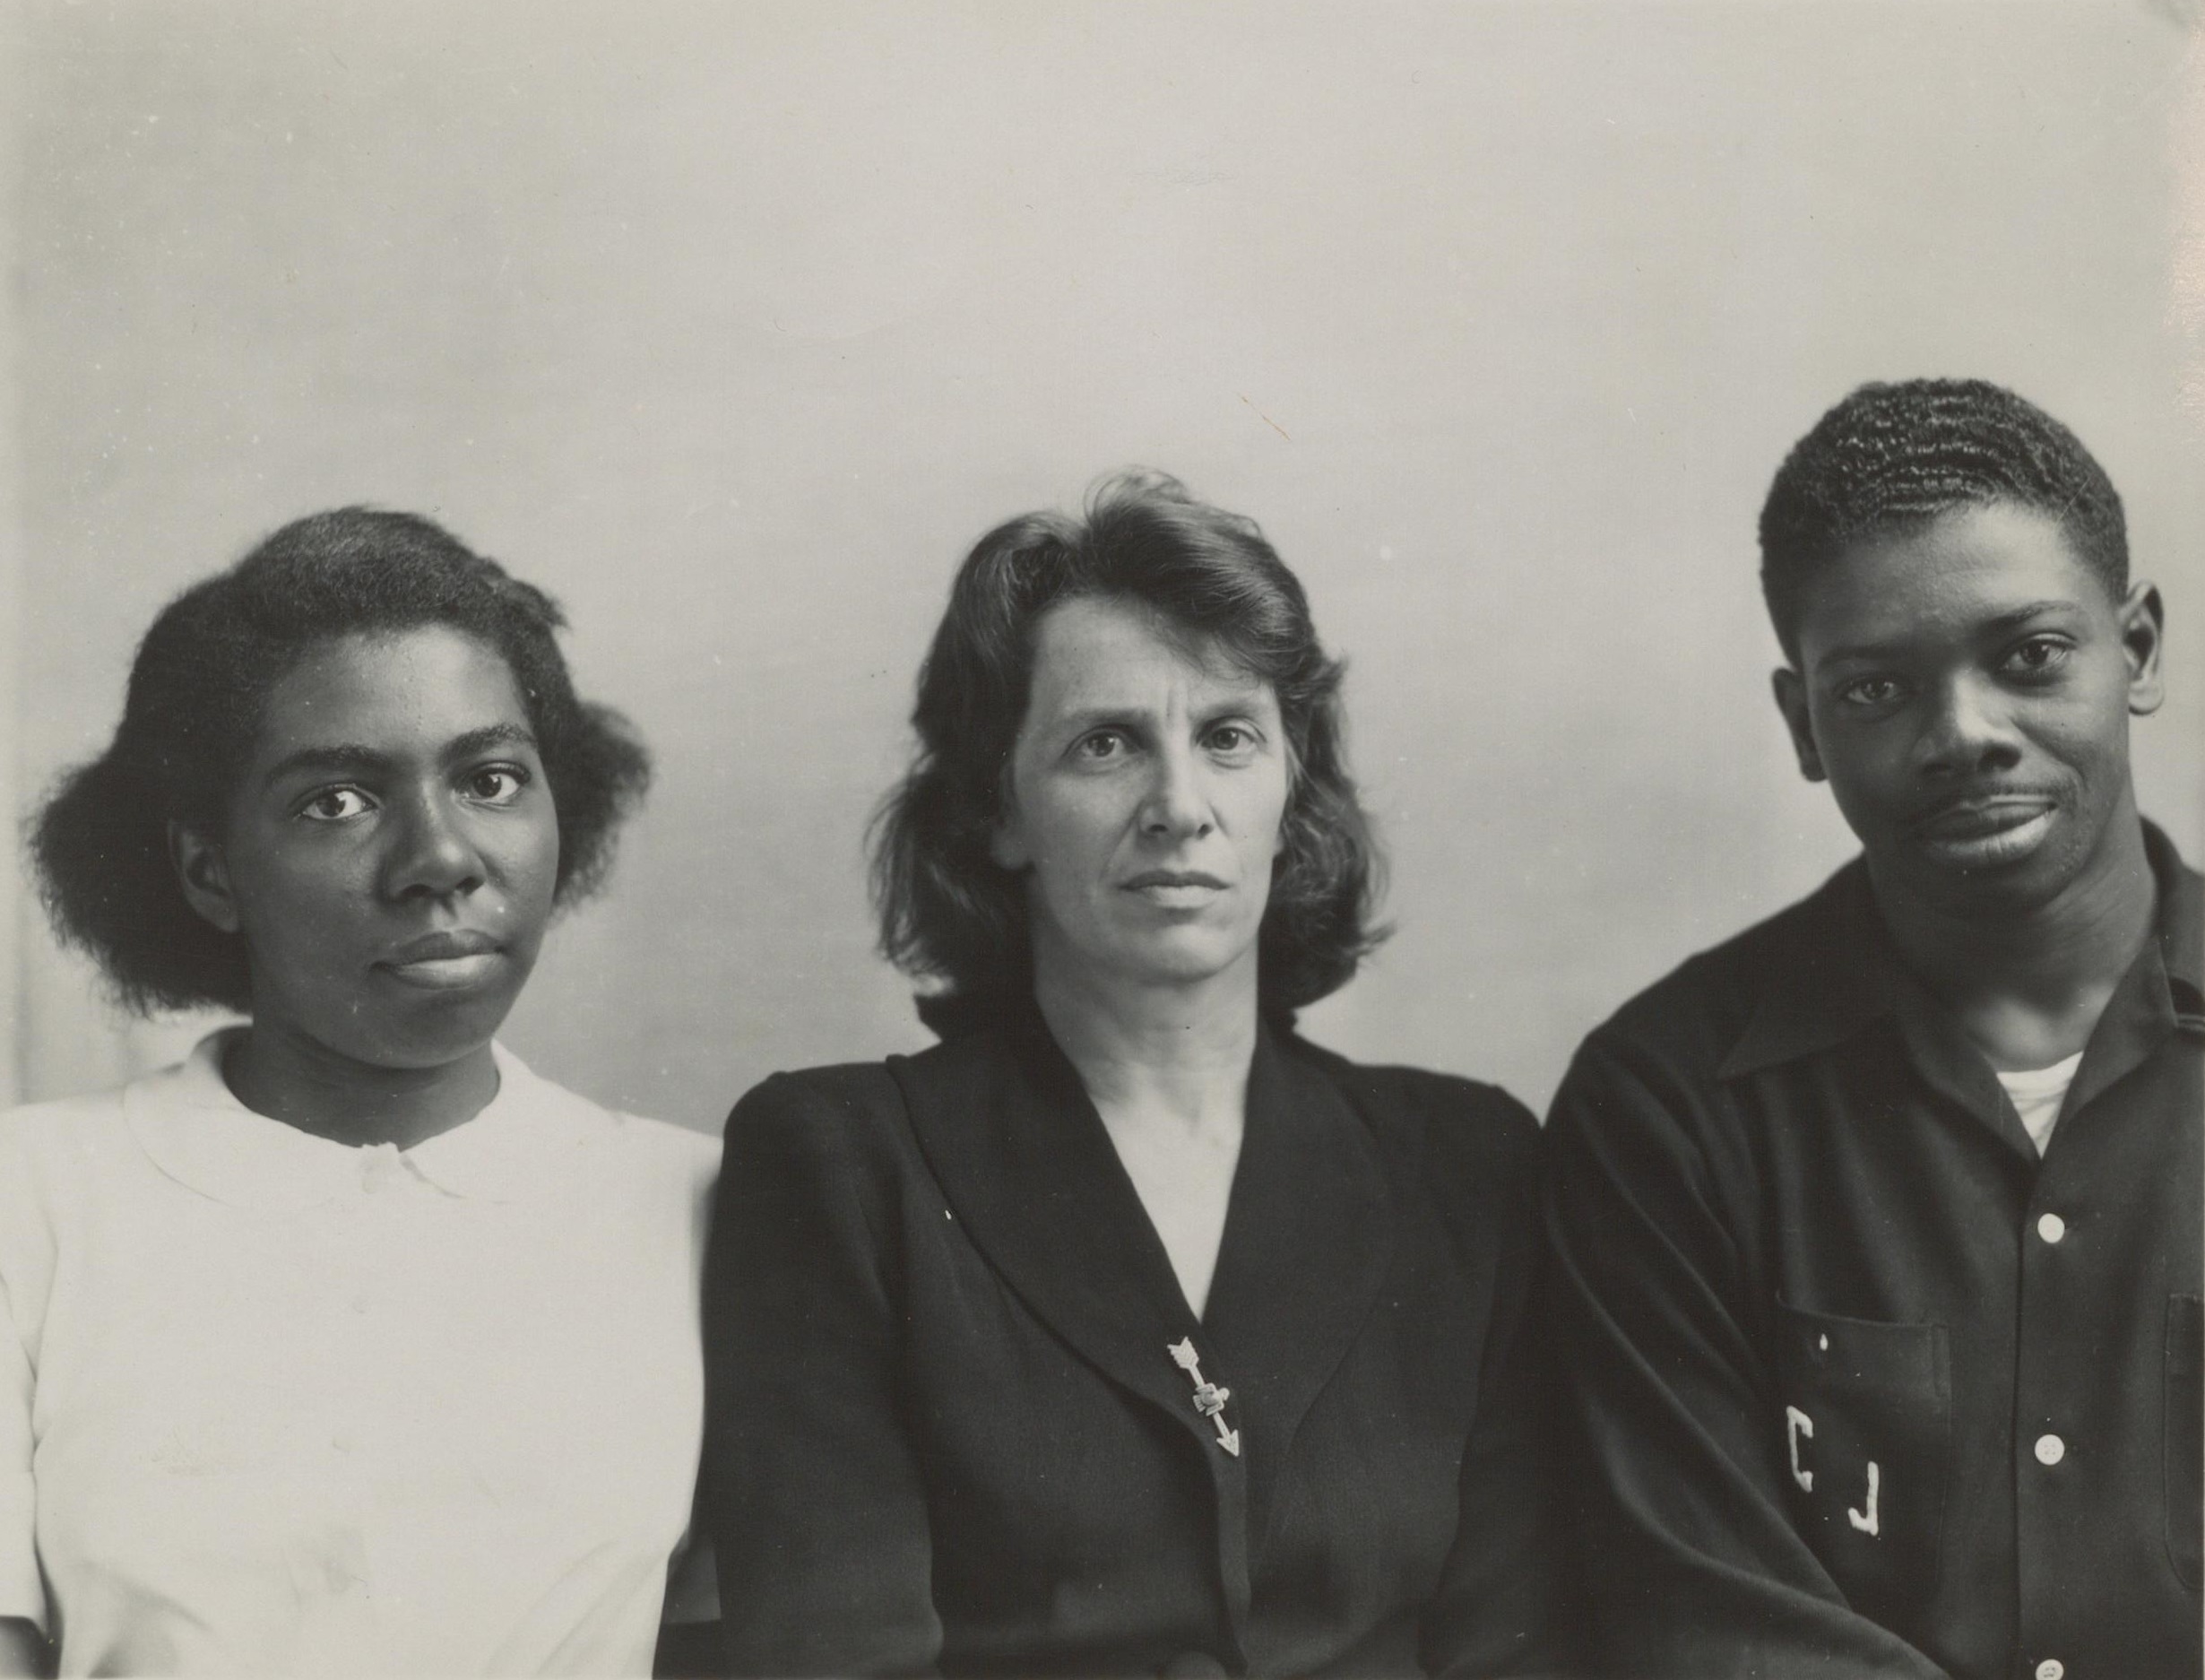 Black and white photograph of a black woman, a white woman, and a black man, seen from the waist up